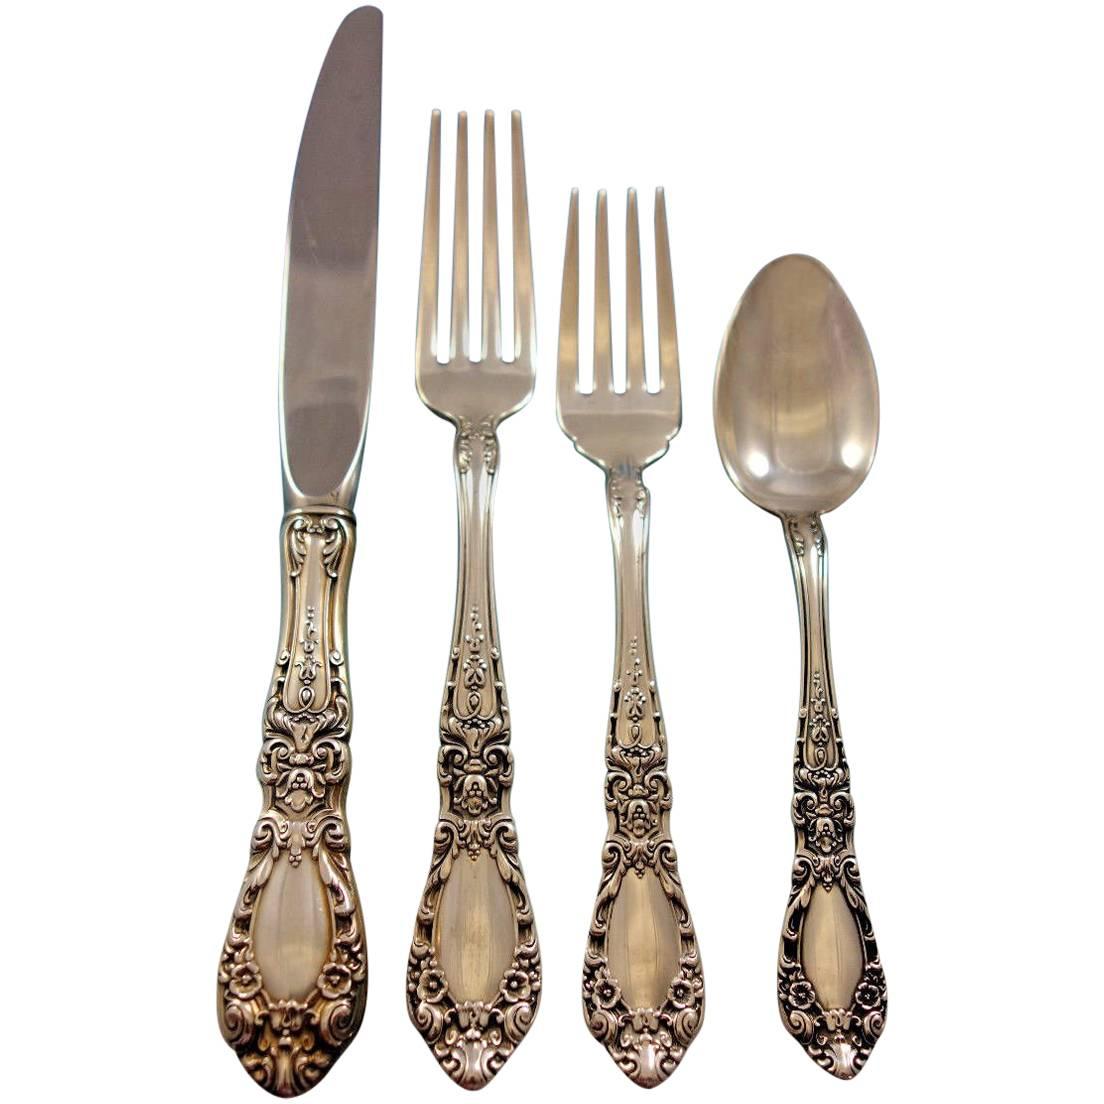 Prince Eugene by Alvin Sterling Silver Flatware Set for 8 Service 32 Pieces